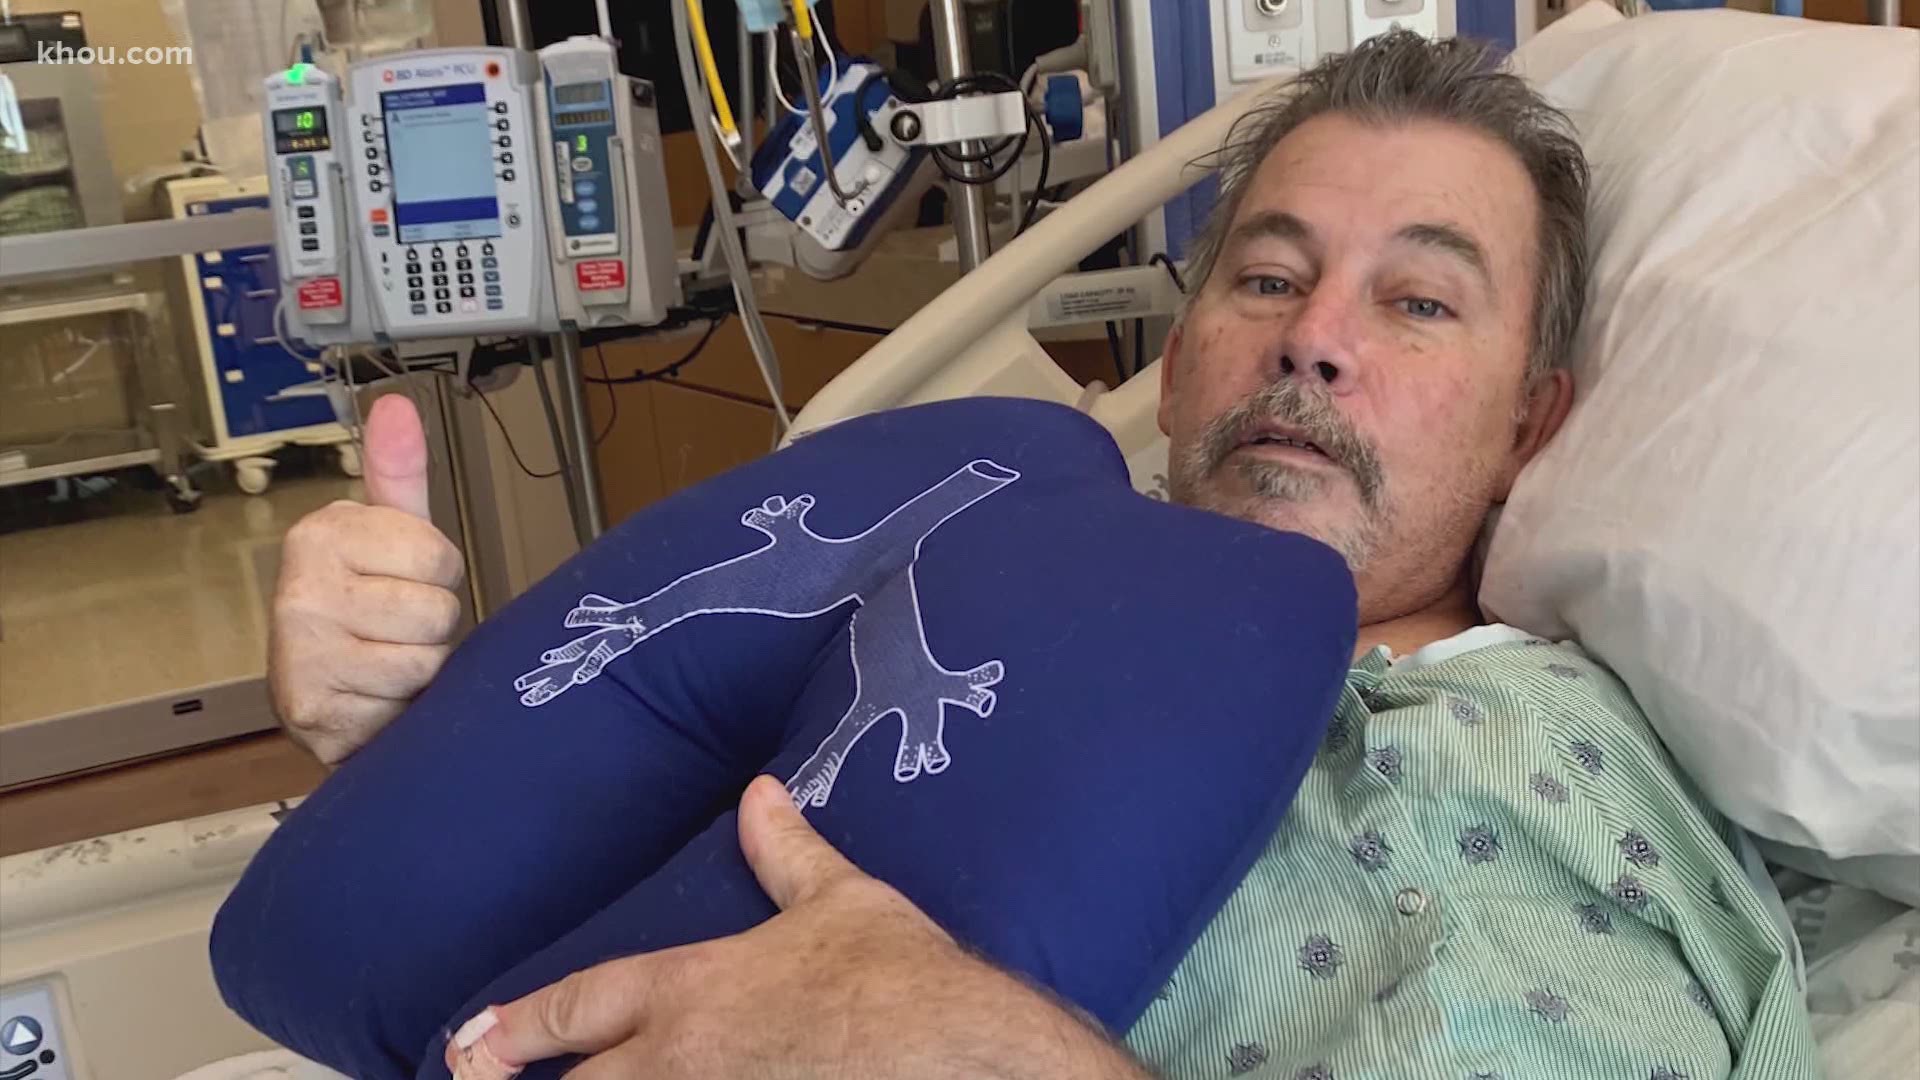 Thomas Steele, who is in his early 50s, was hospitalized with a severe case of coronavirus that resulted in him needing a double lung transplant.